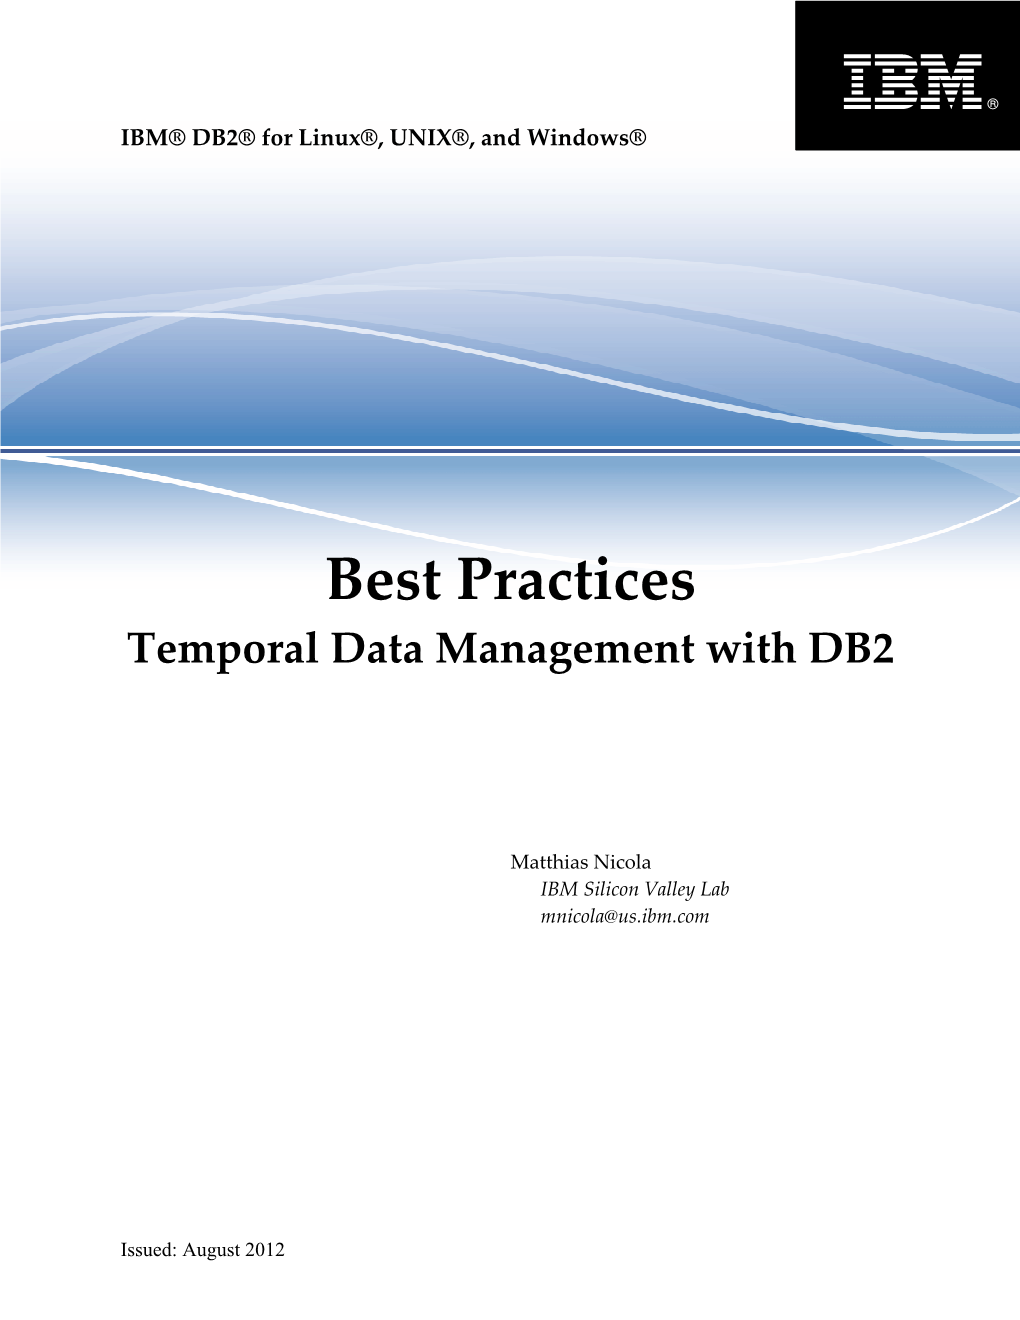 Temporal Data Management with DB2